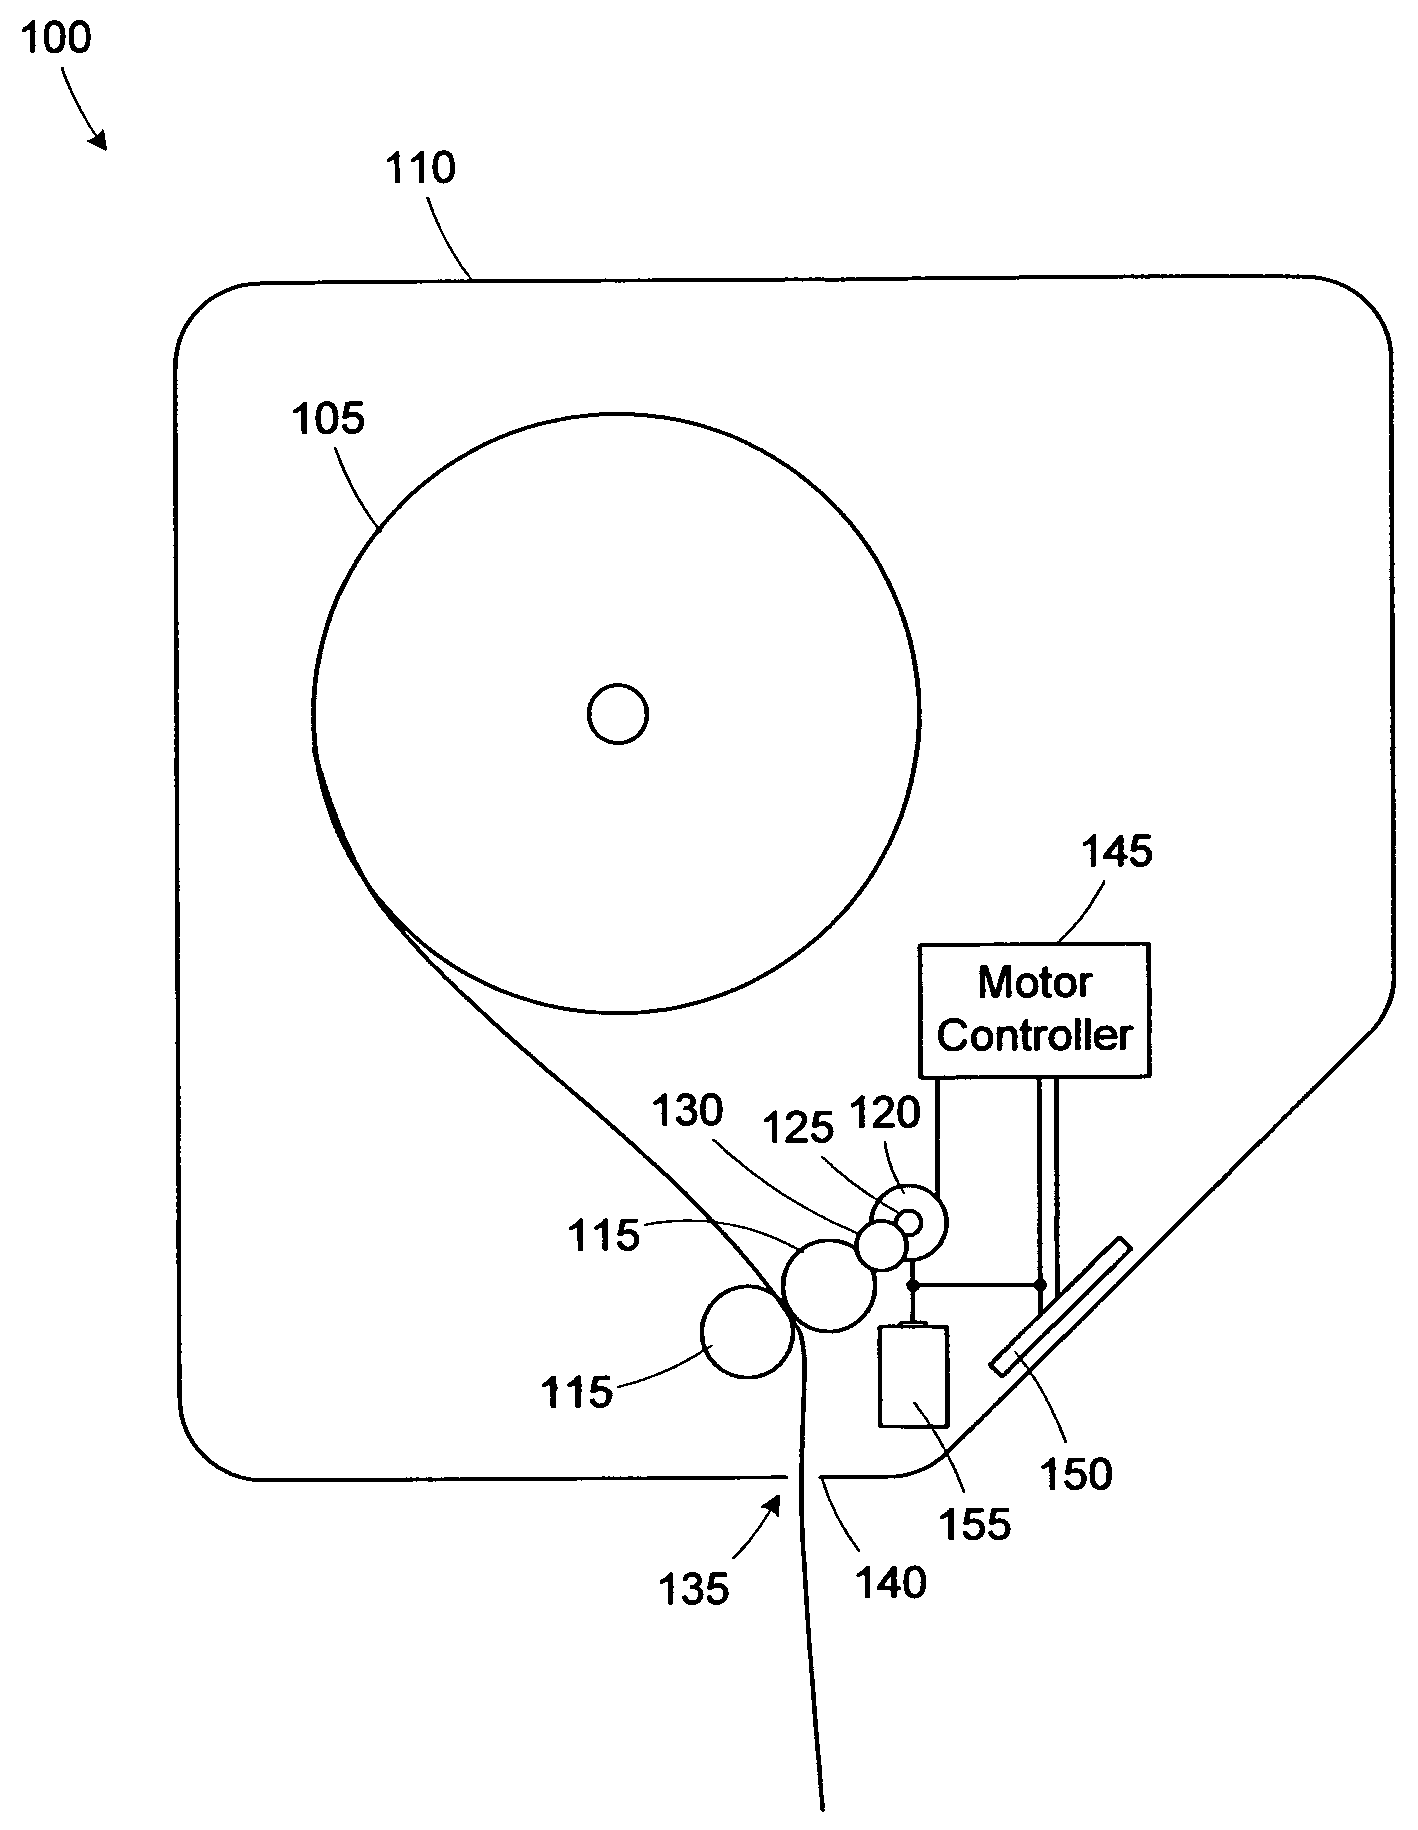 Method and apparatus for controlling a DC motor by counting current pulses